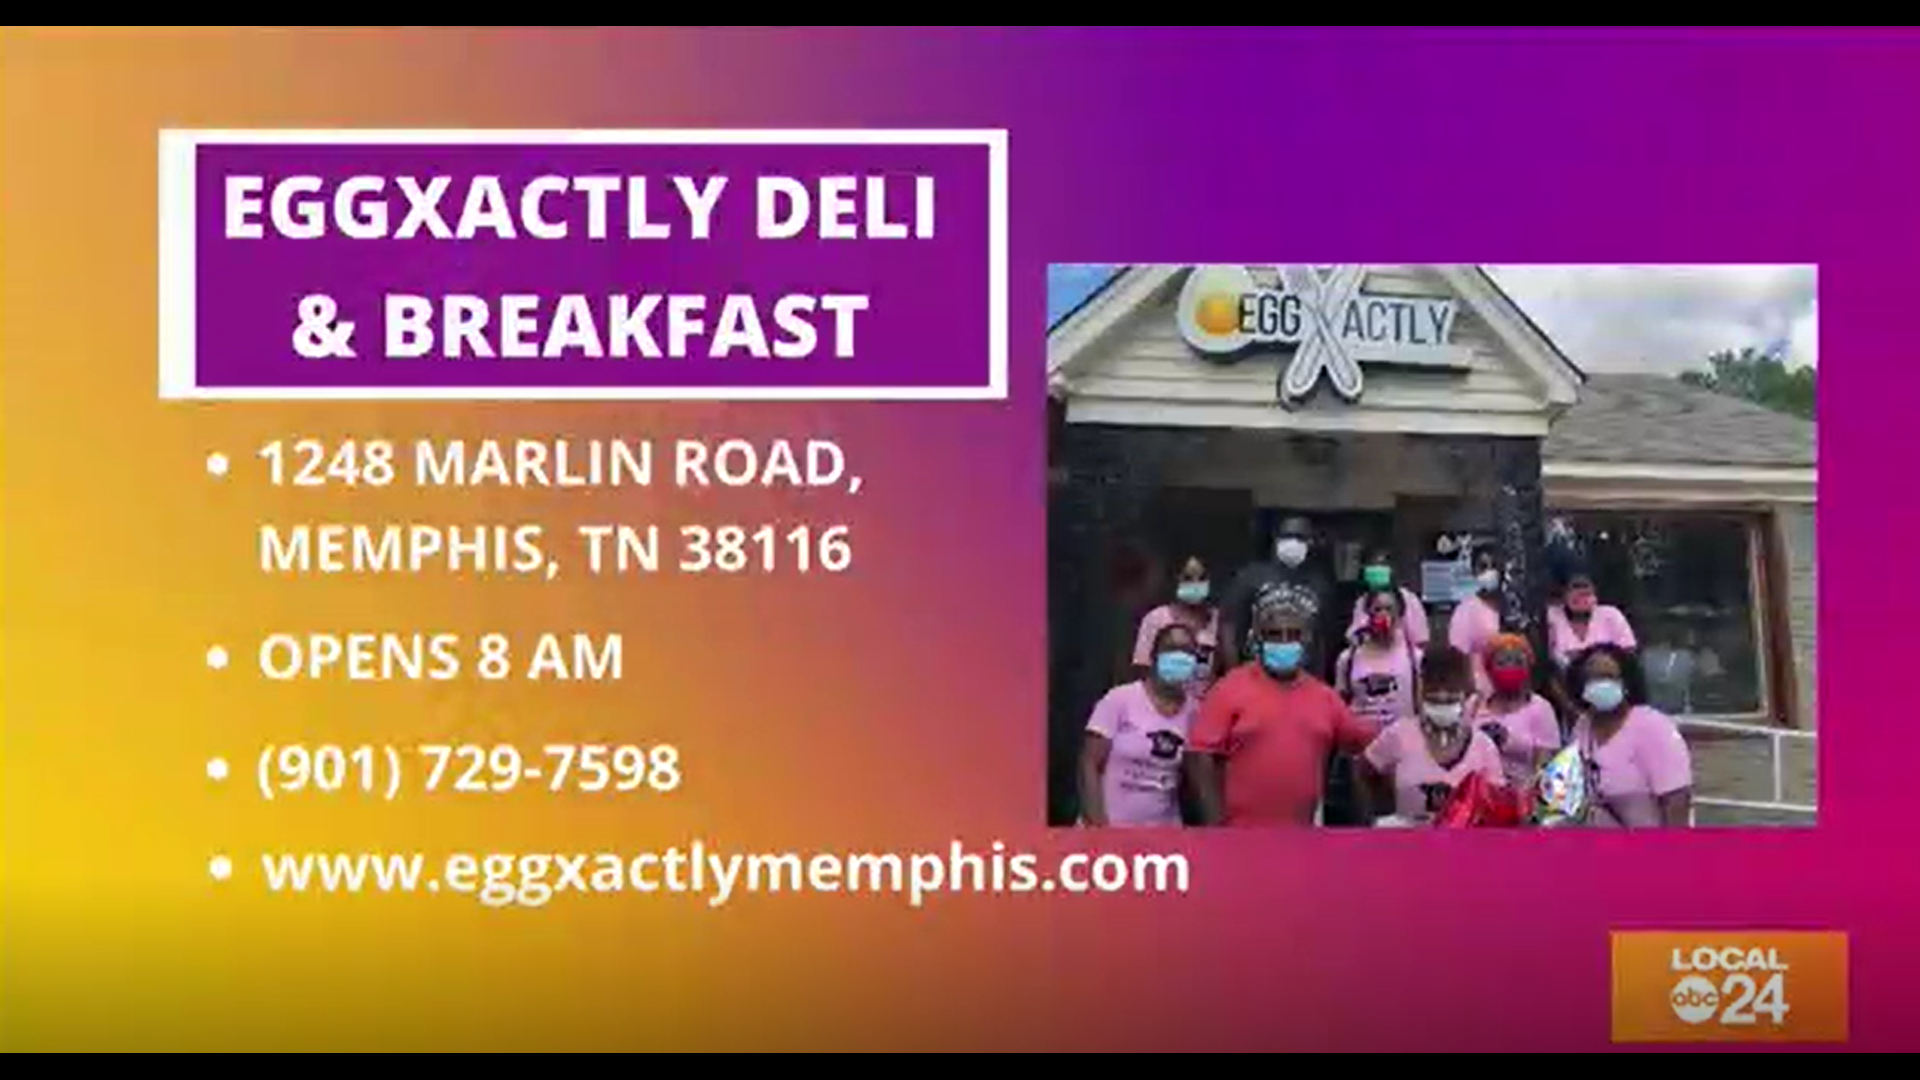 Just in time for Memphis Black Restaurant Week, join Sydney Neely of "The Shortcut" as we take a closer look at Eggxactly Deli and Breakfast!